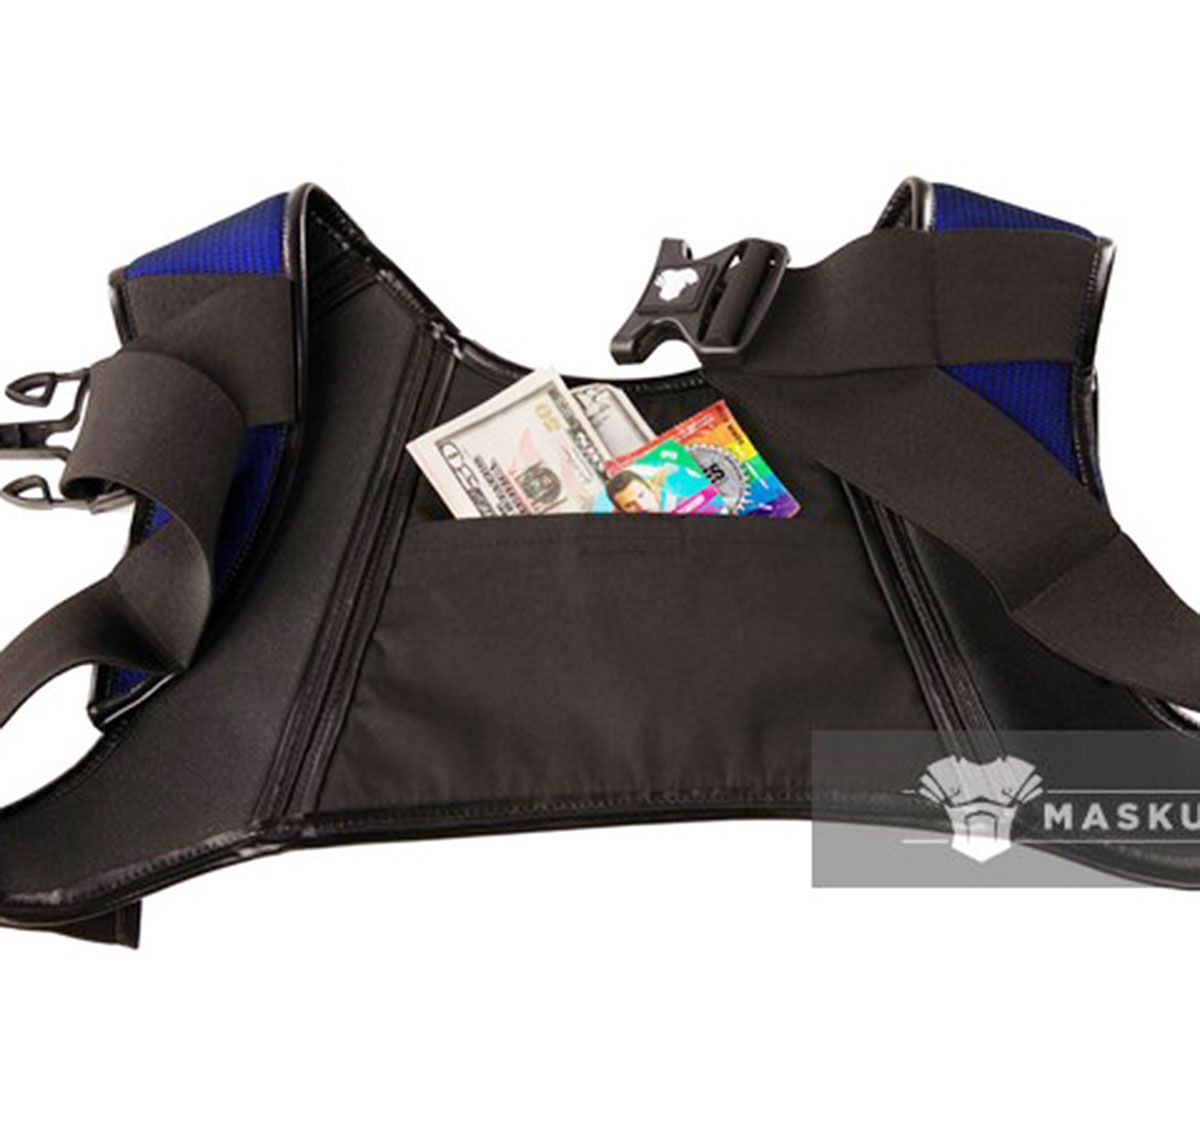 MASKULO Harness ARMORED. COLOR-UNDER. HOLSTER CHEST HARNESS. AC064, black/blue